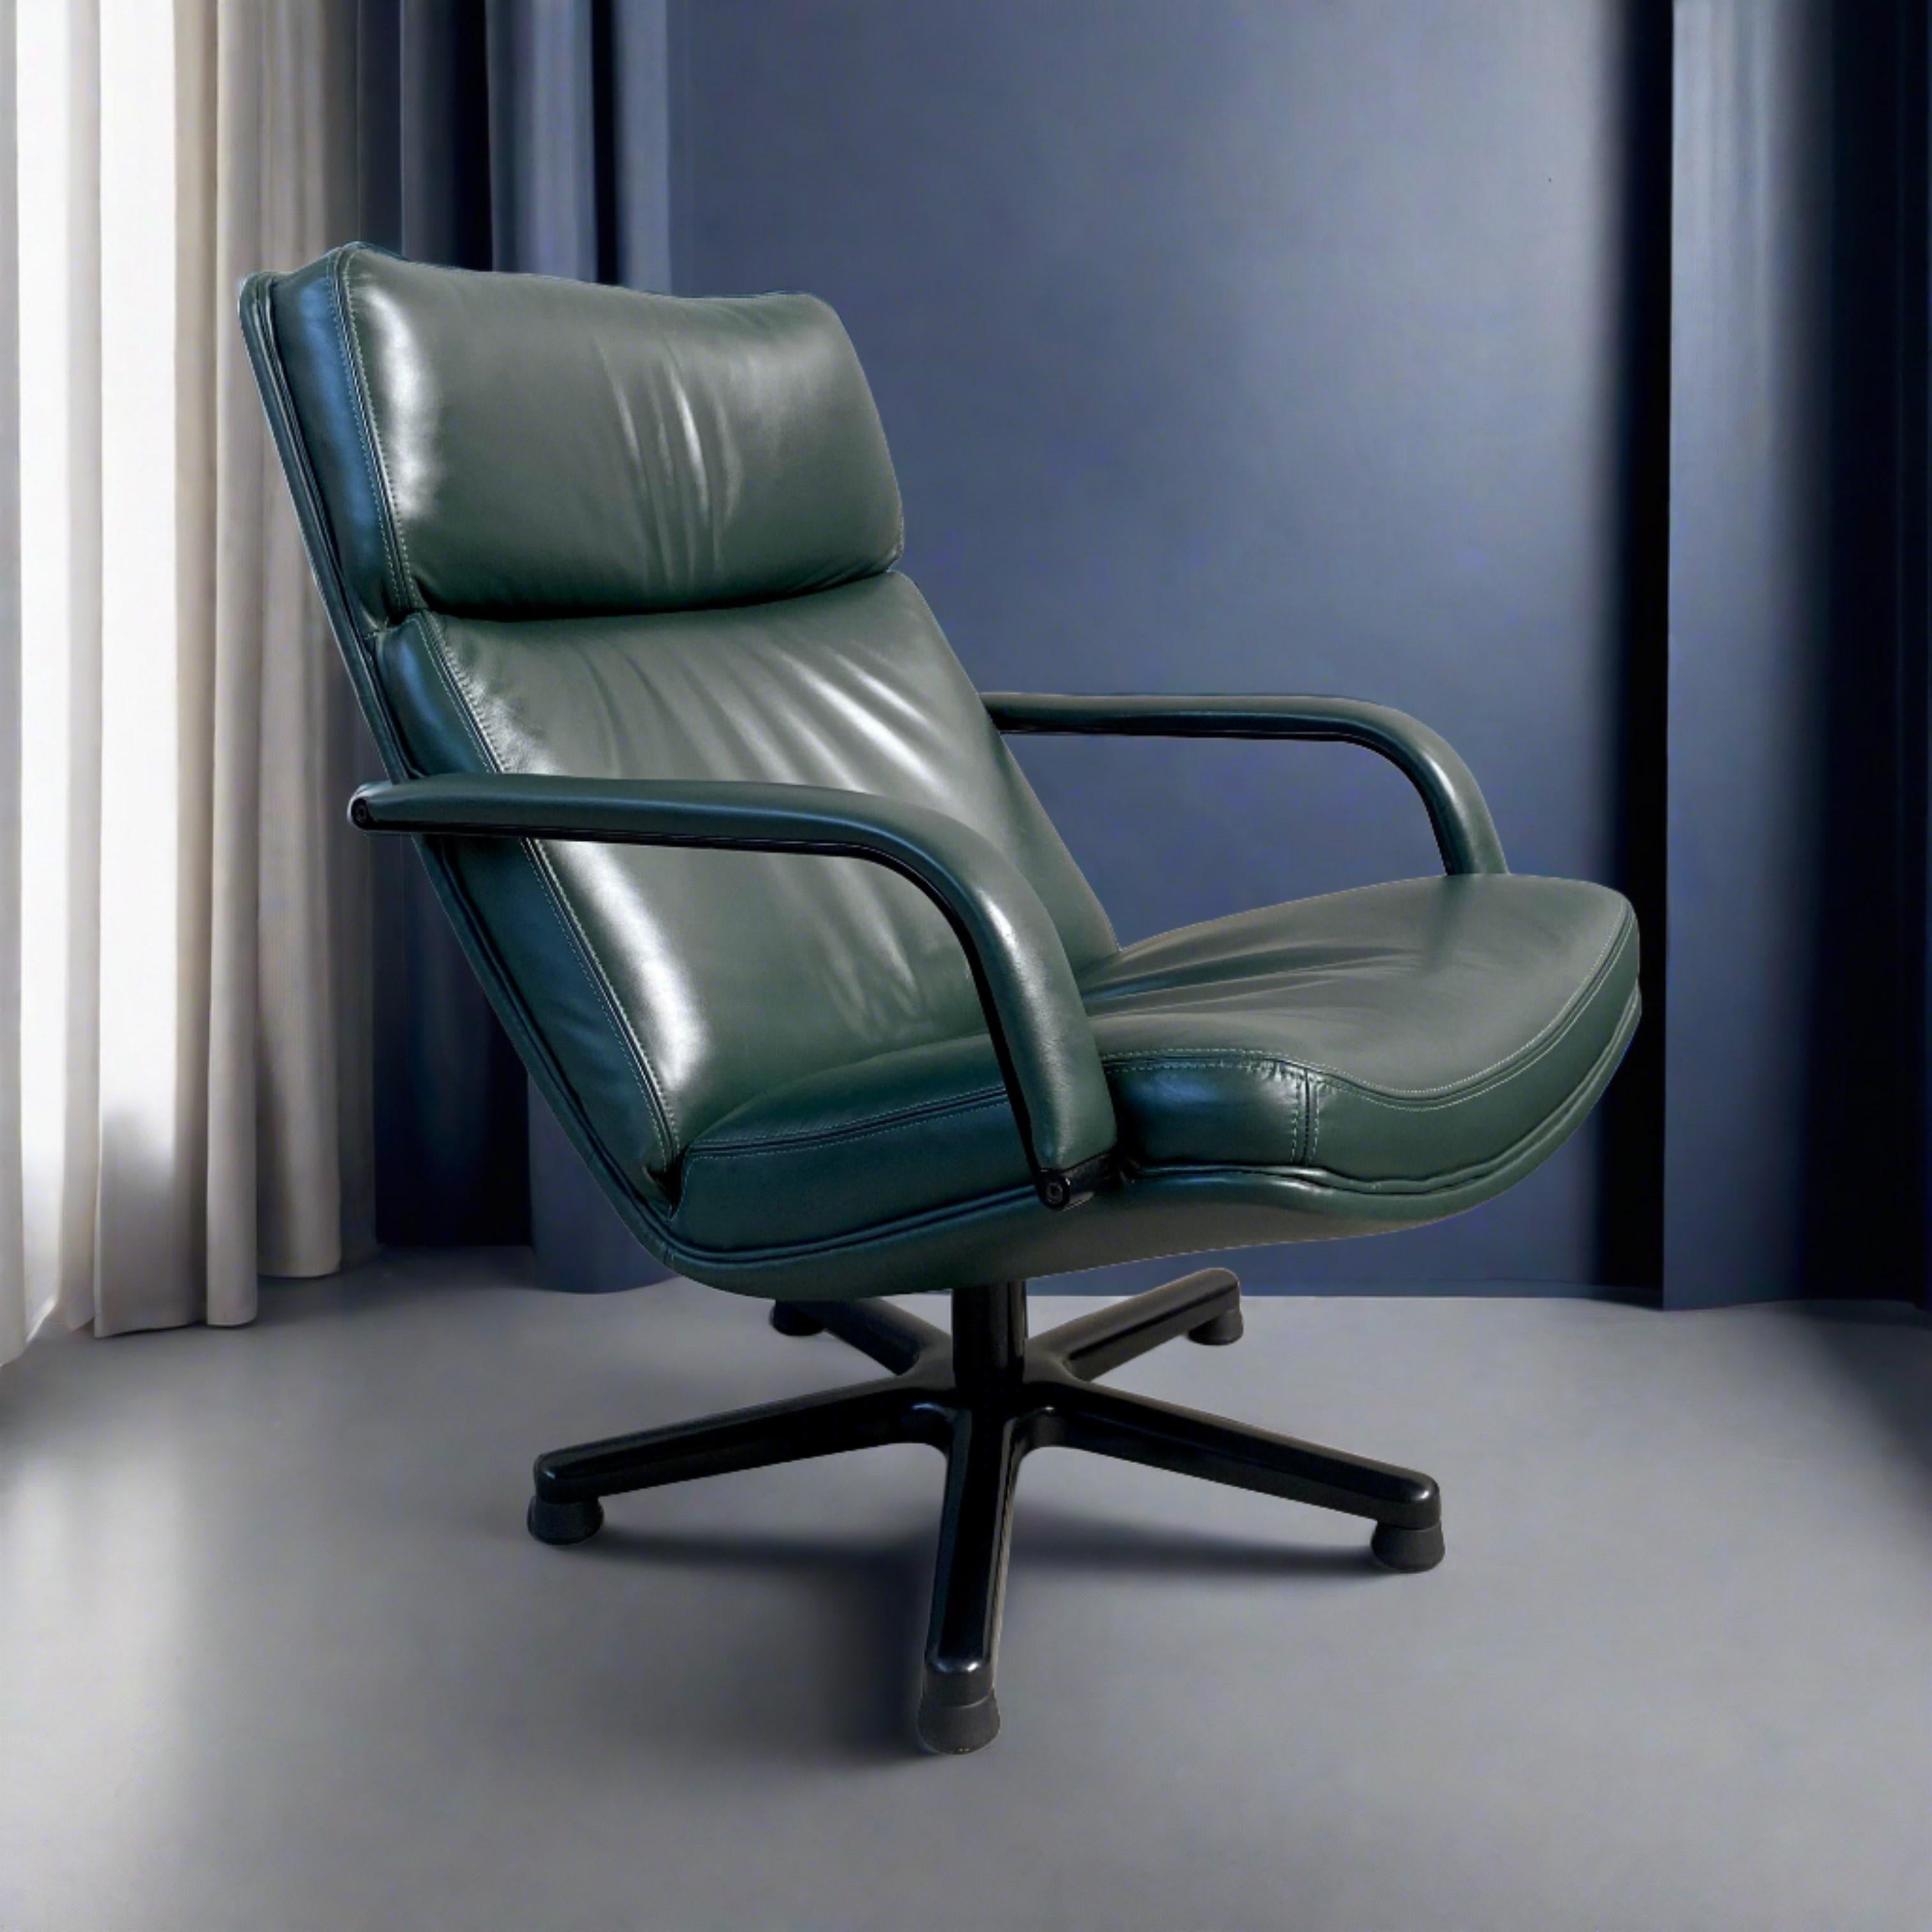 Introducing the Timeless Elegance of the Forrest Green Leather Swivel Lounge Chair Model F141 by Geoffrey Harcourt for Artifort Netherlands 1978

Step into a world of sophistication and comfort with the iconic Forrest Green Leather Swivel Lounge